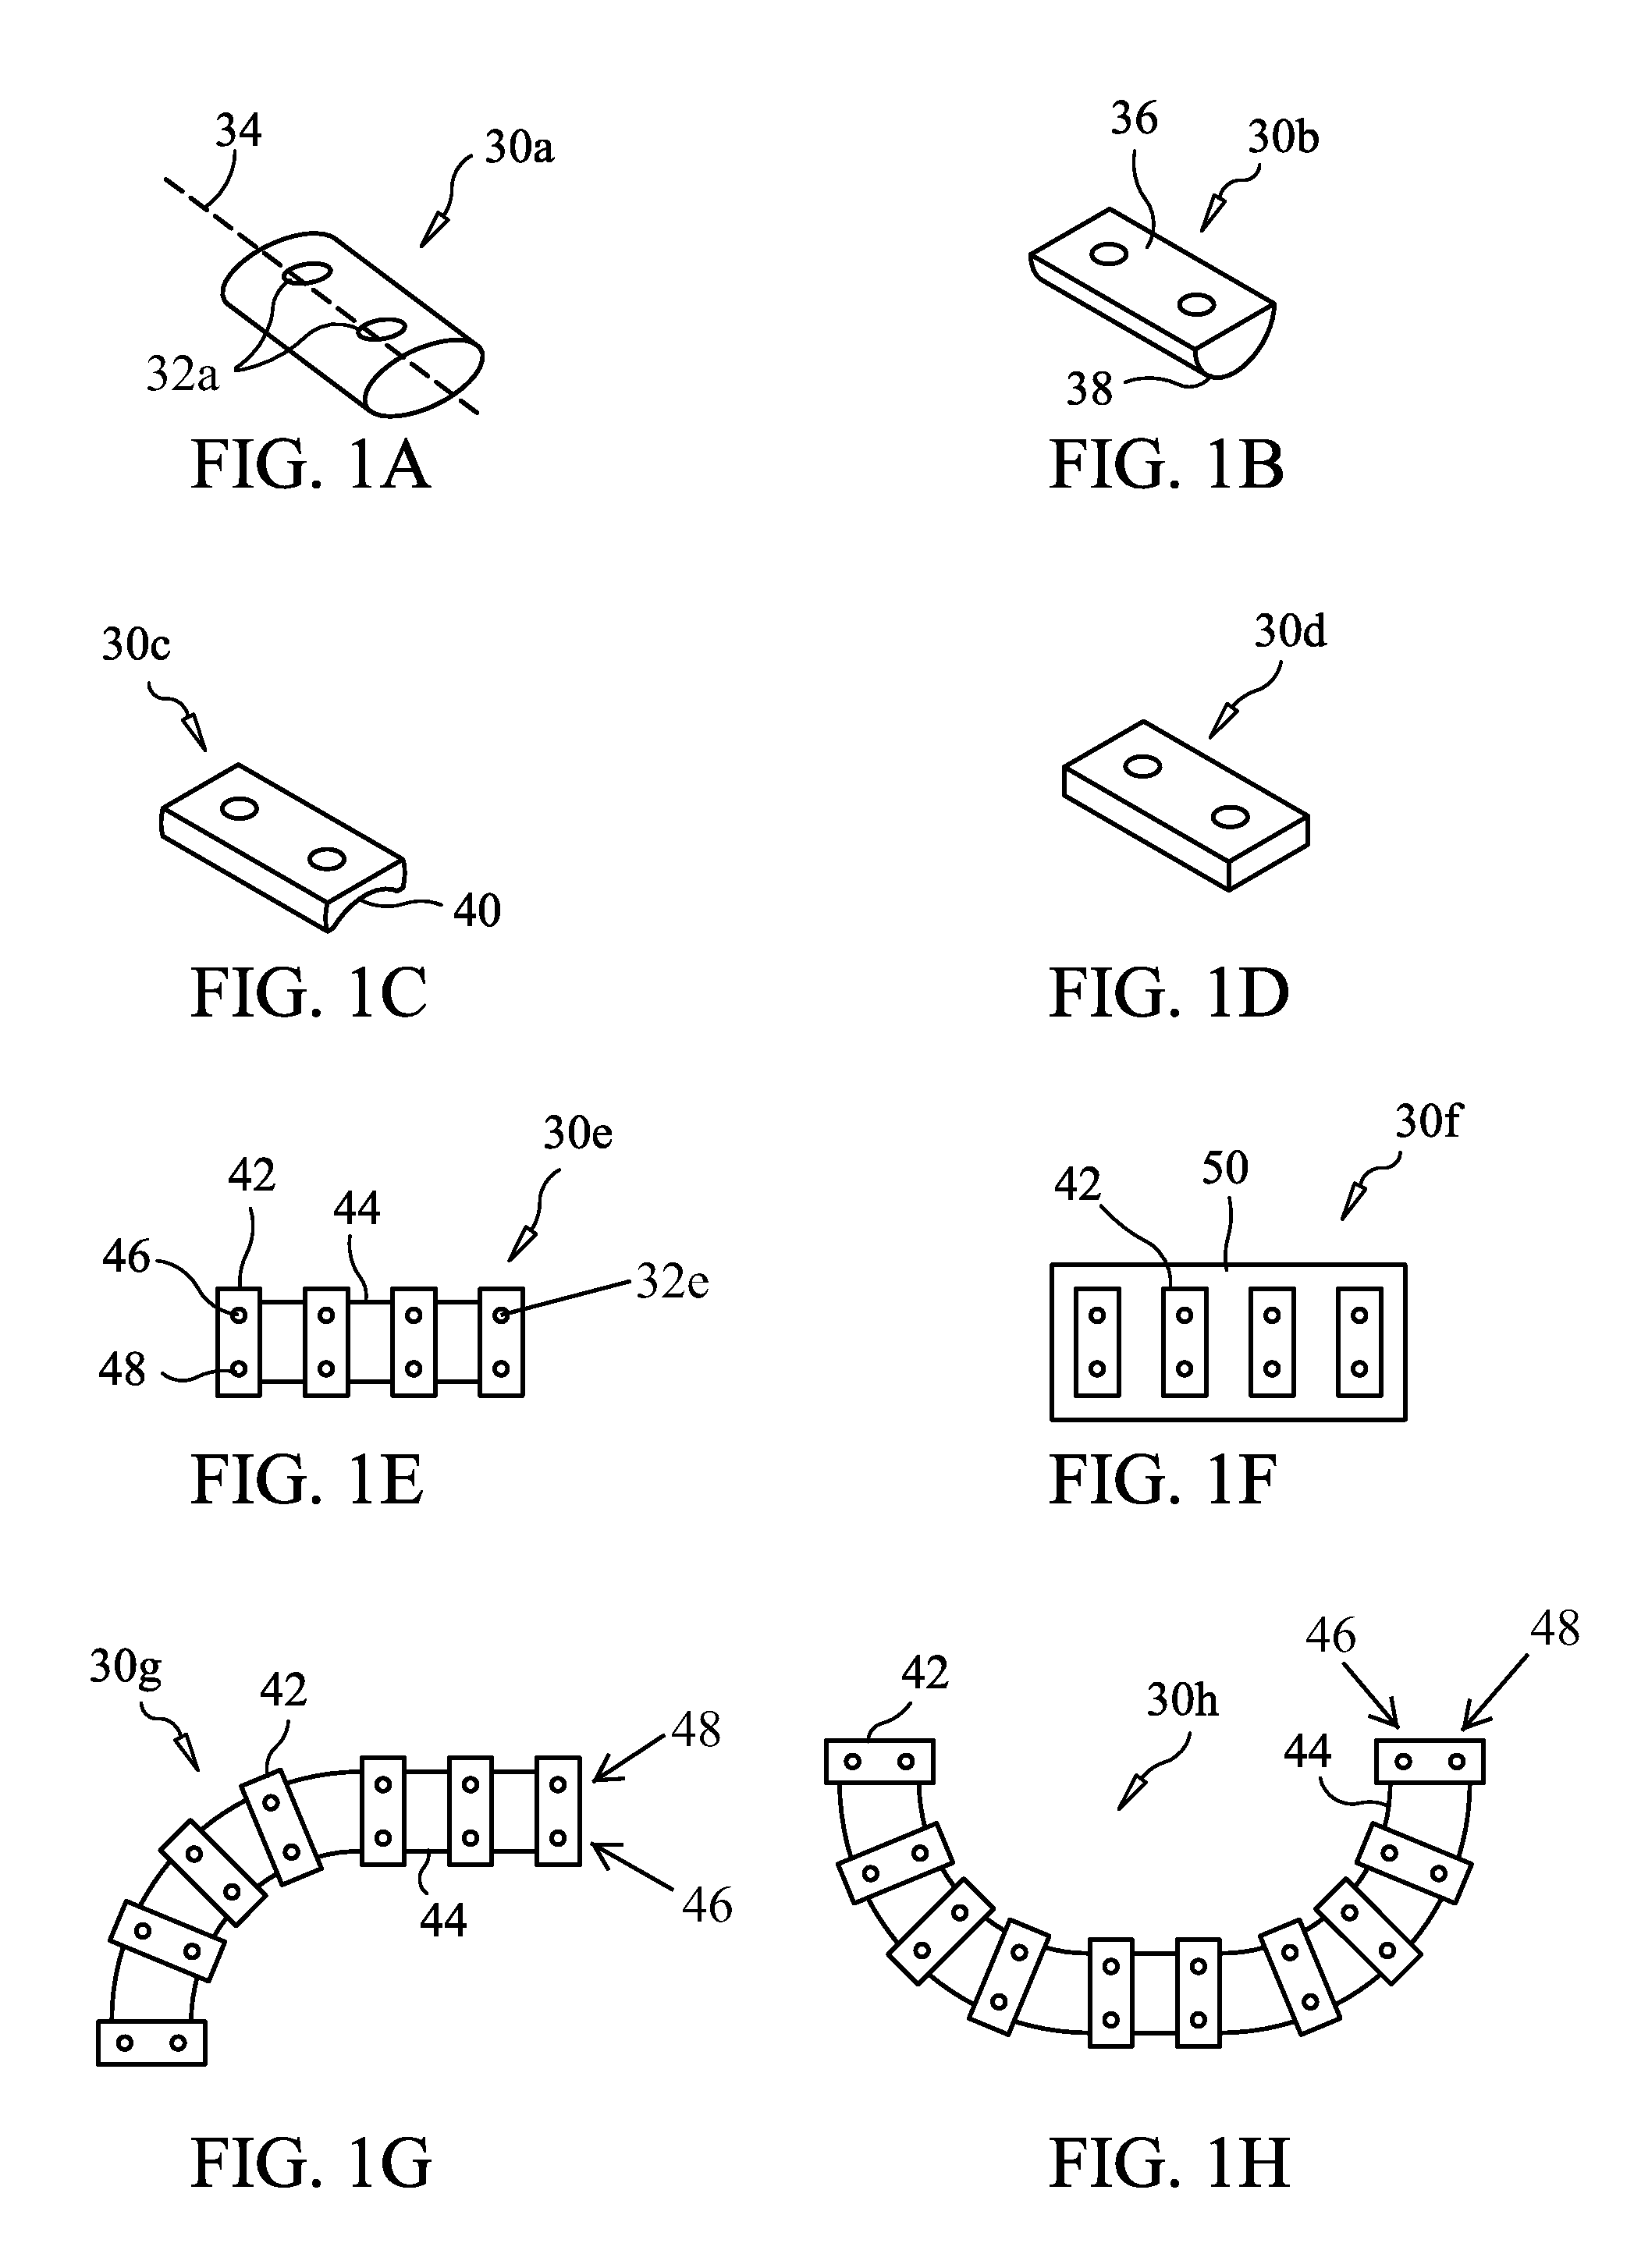 Expandable introducer system and methods